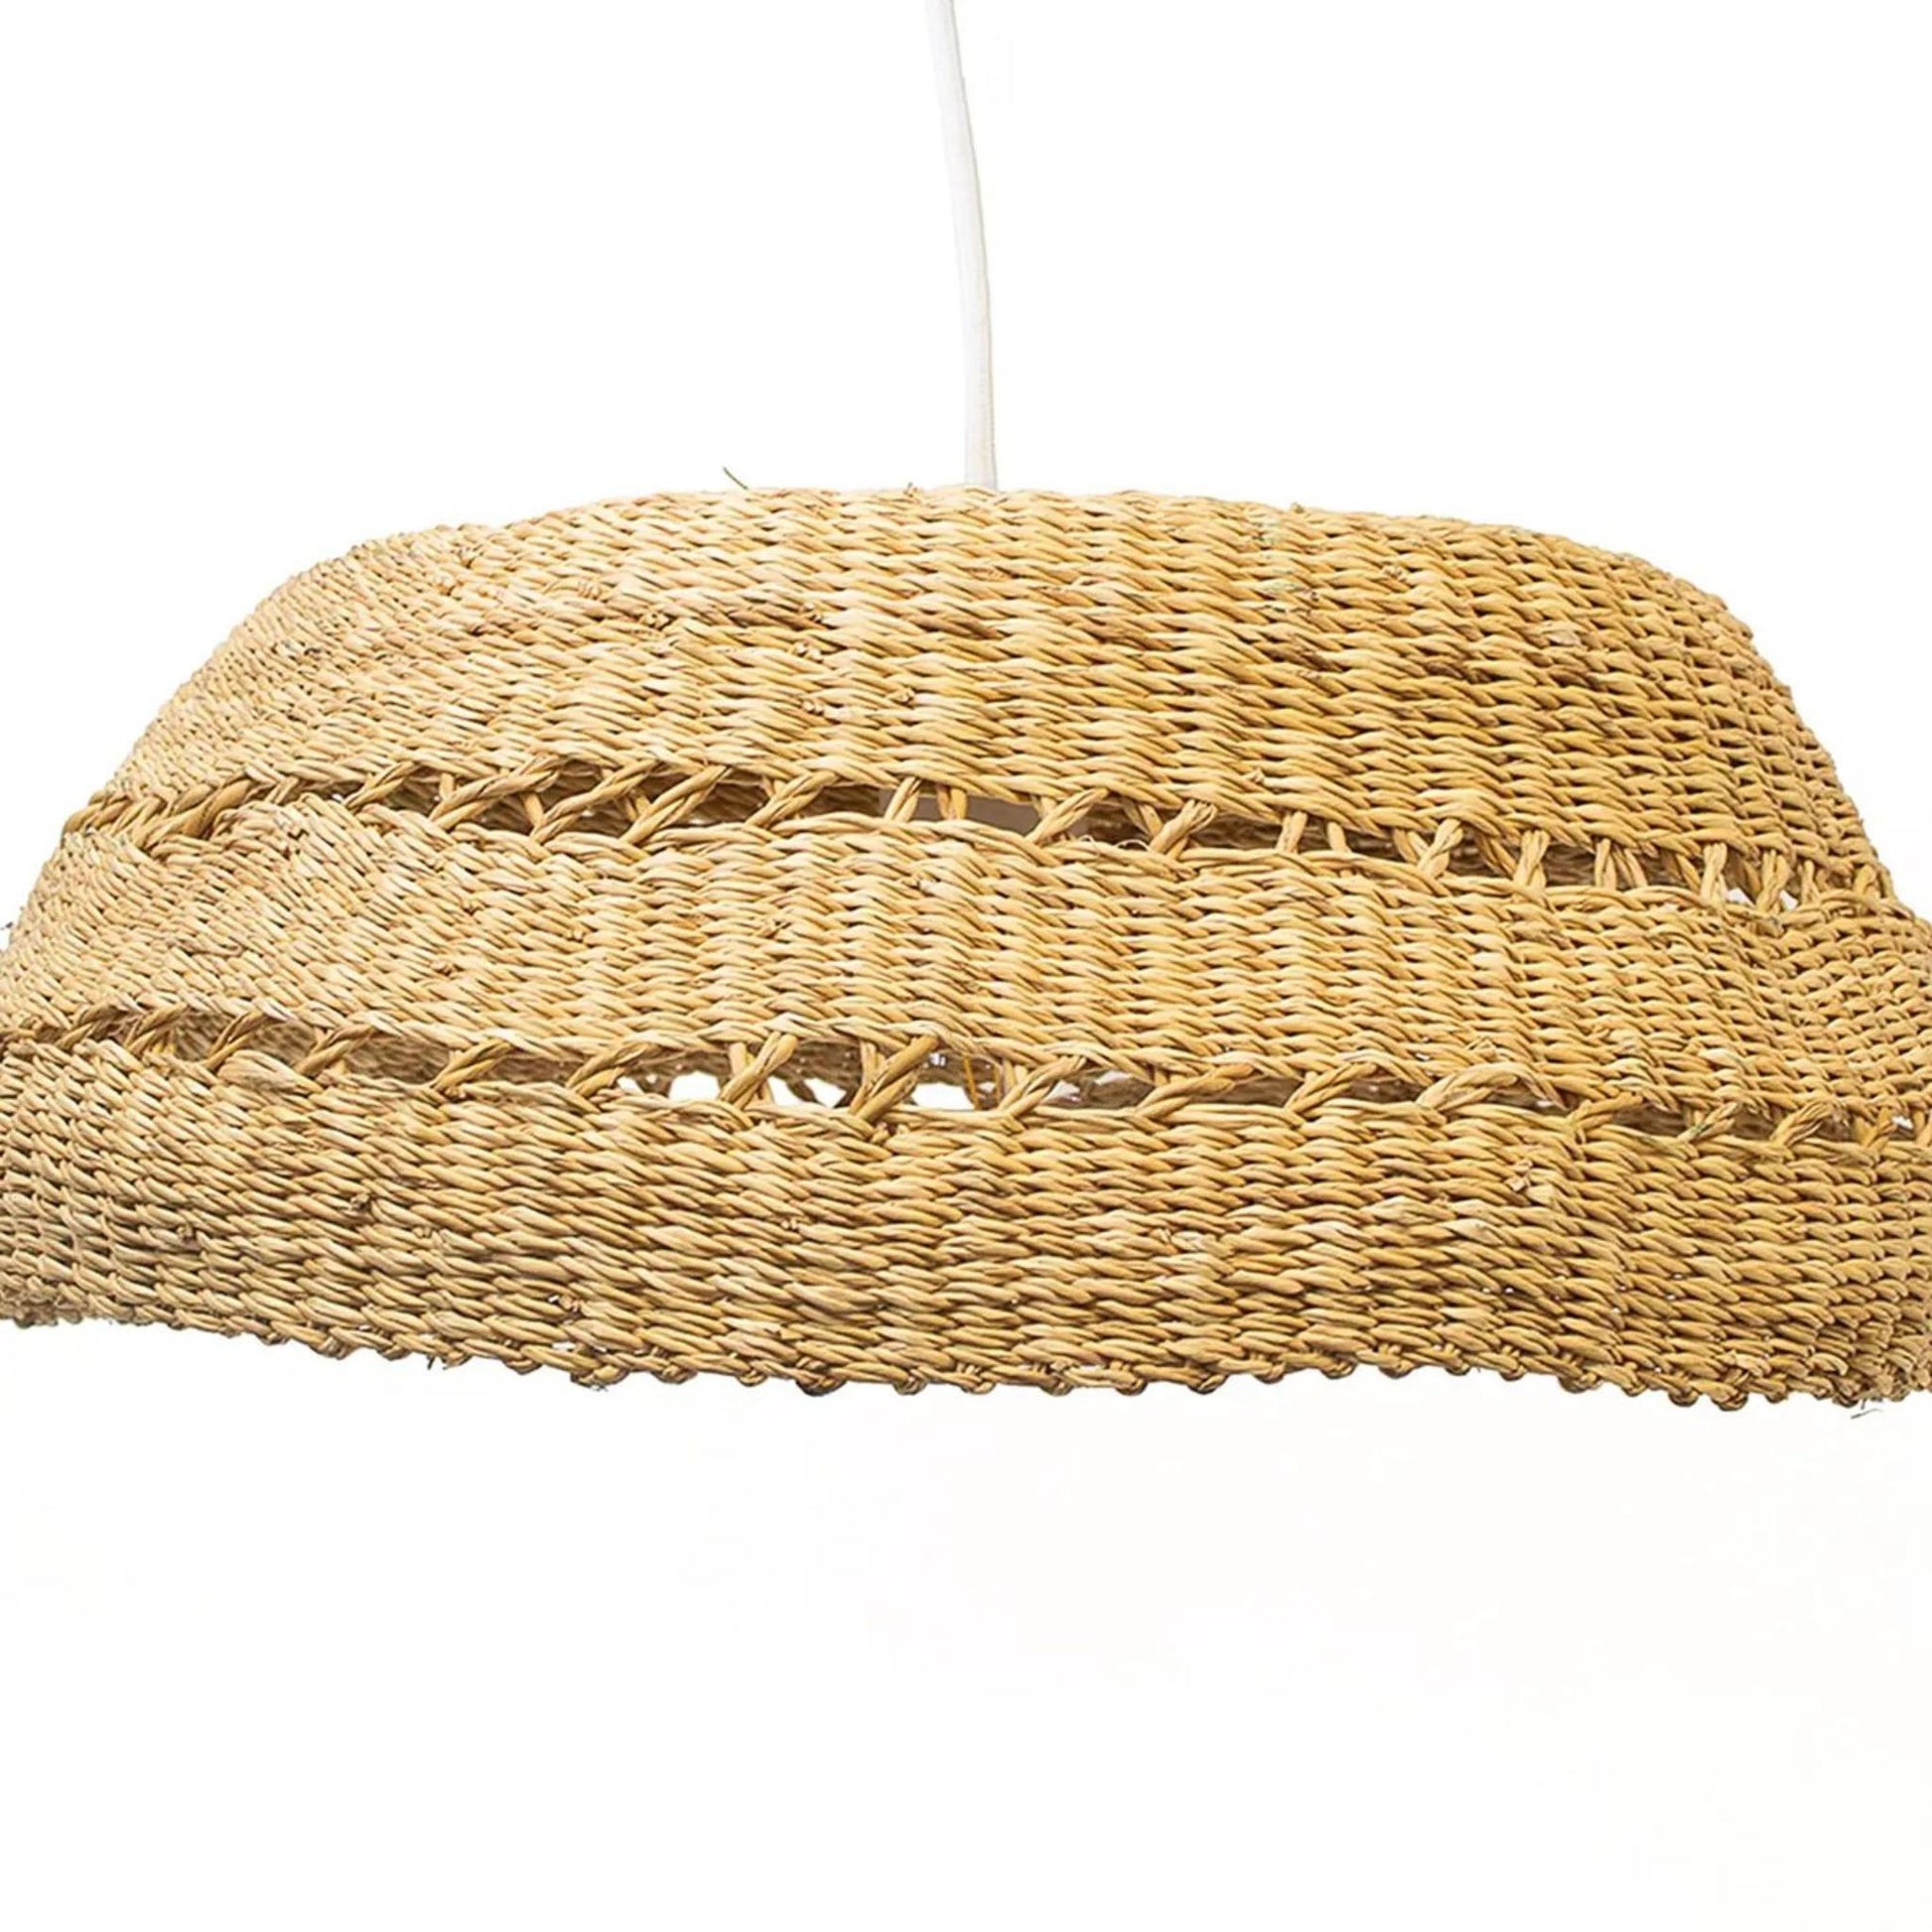 Made from all natural fibers of Elephant Grass. Made from all natural fibers of Elephant Grass